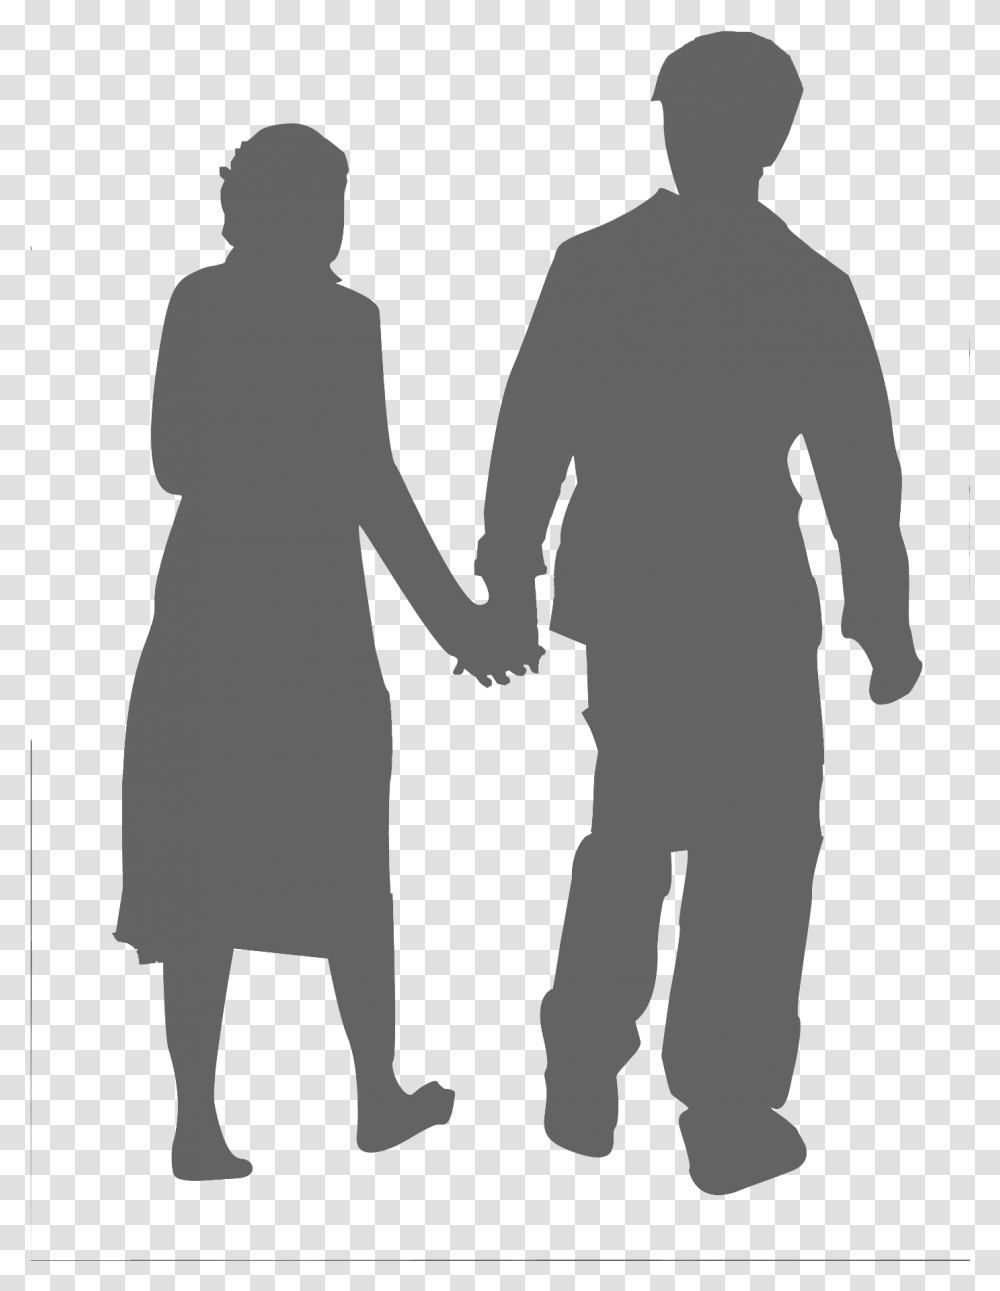 Download Walking Dog Silhouette Your Success Is My White People Silhouette, Hand, Person, Holding Hands, Metropolis Transparent Png